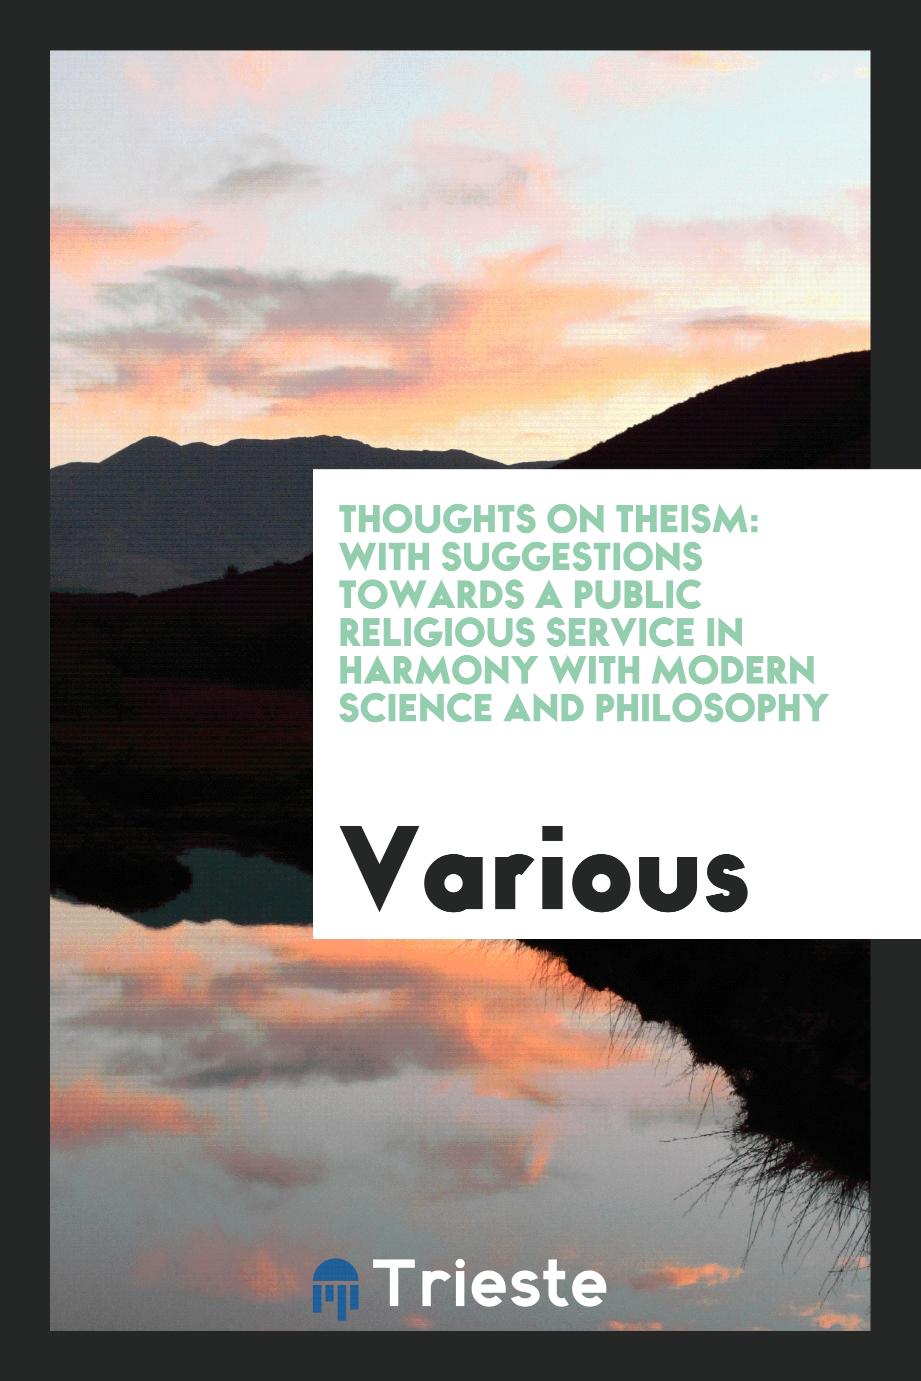 Thoughts on Theism: With Suggestions Towards a Public Religious Service in Harmony with Modern Science and Philosophy